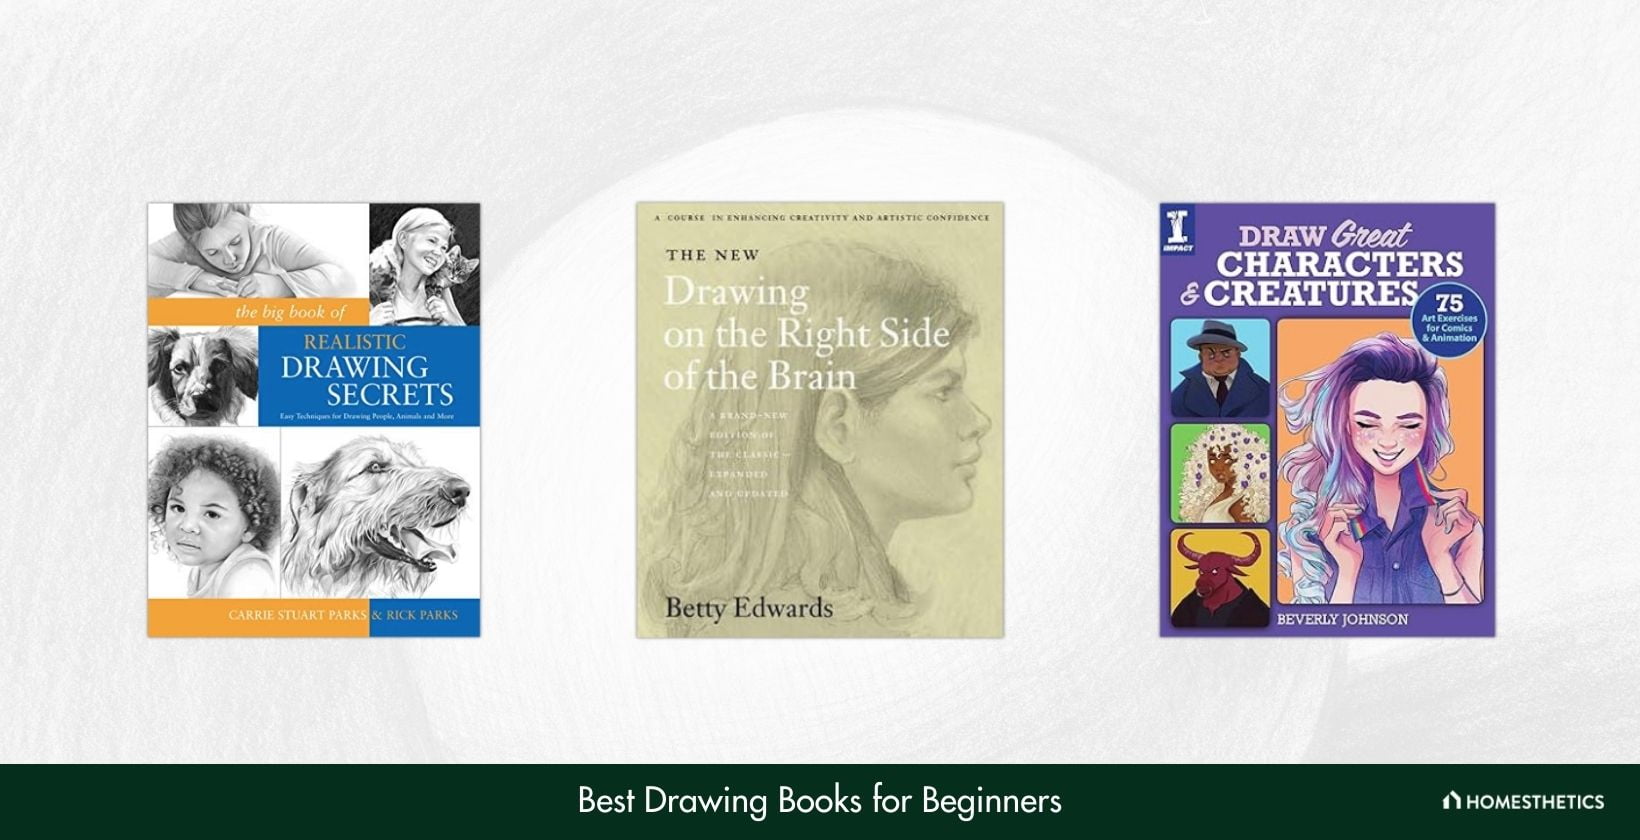 Best Drawing Books for Beginners